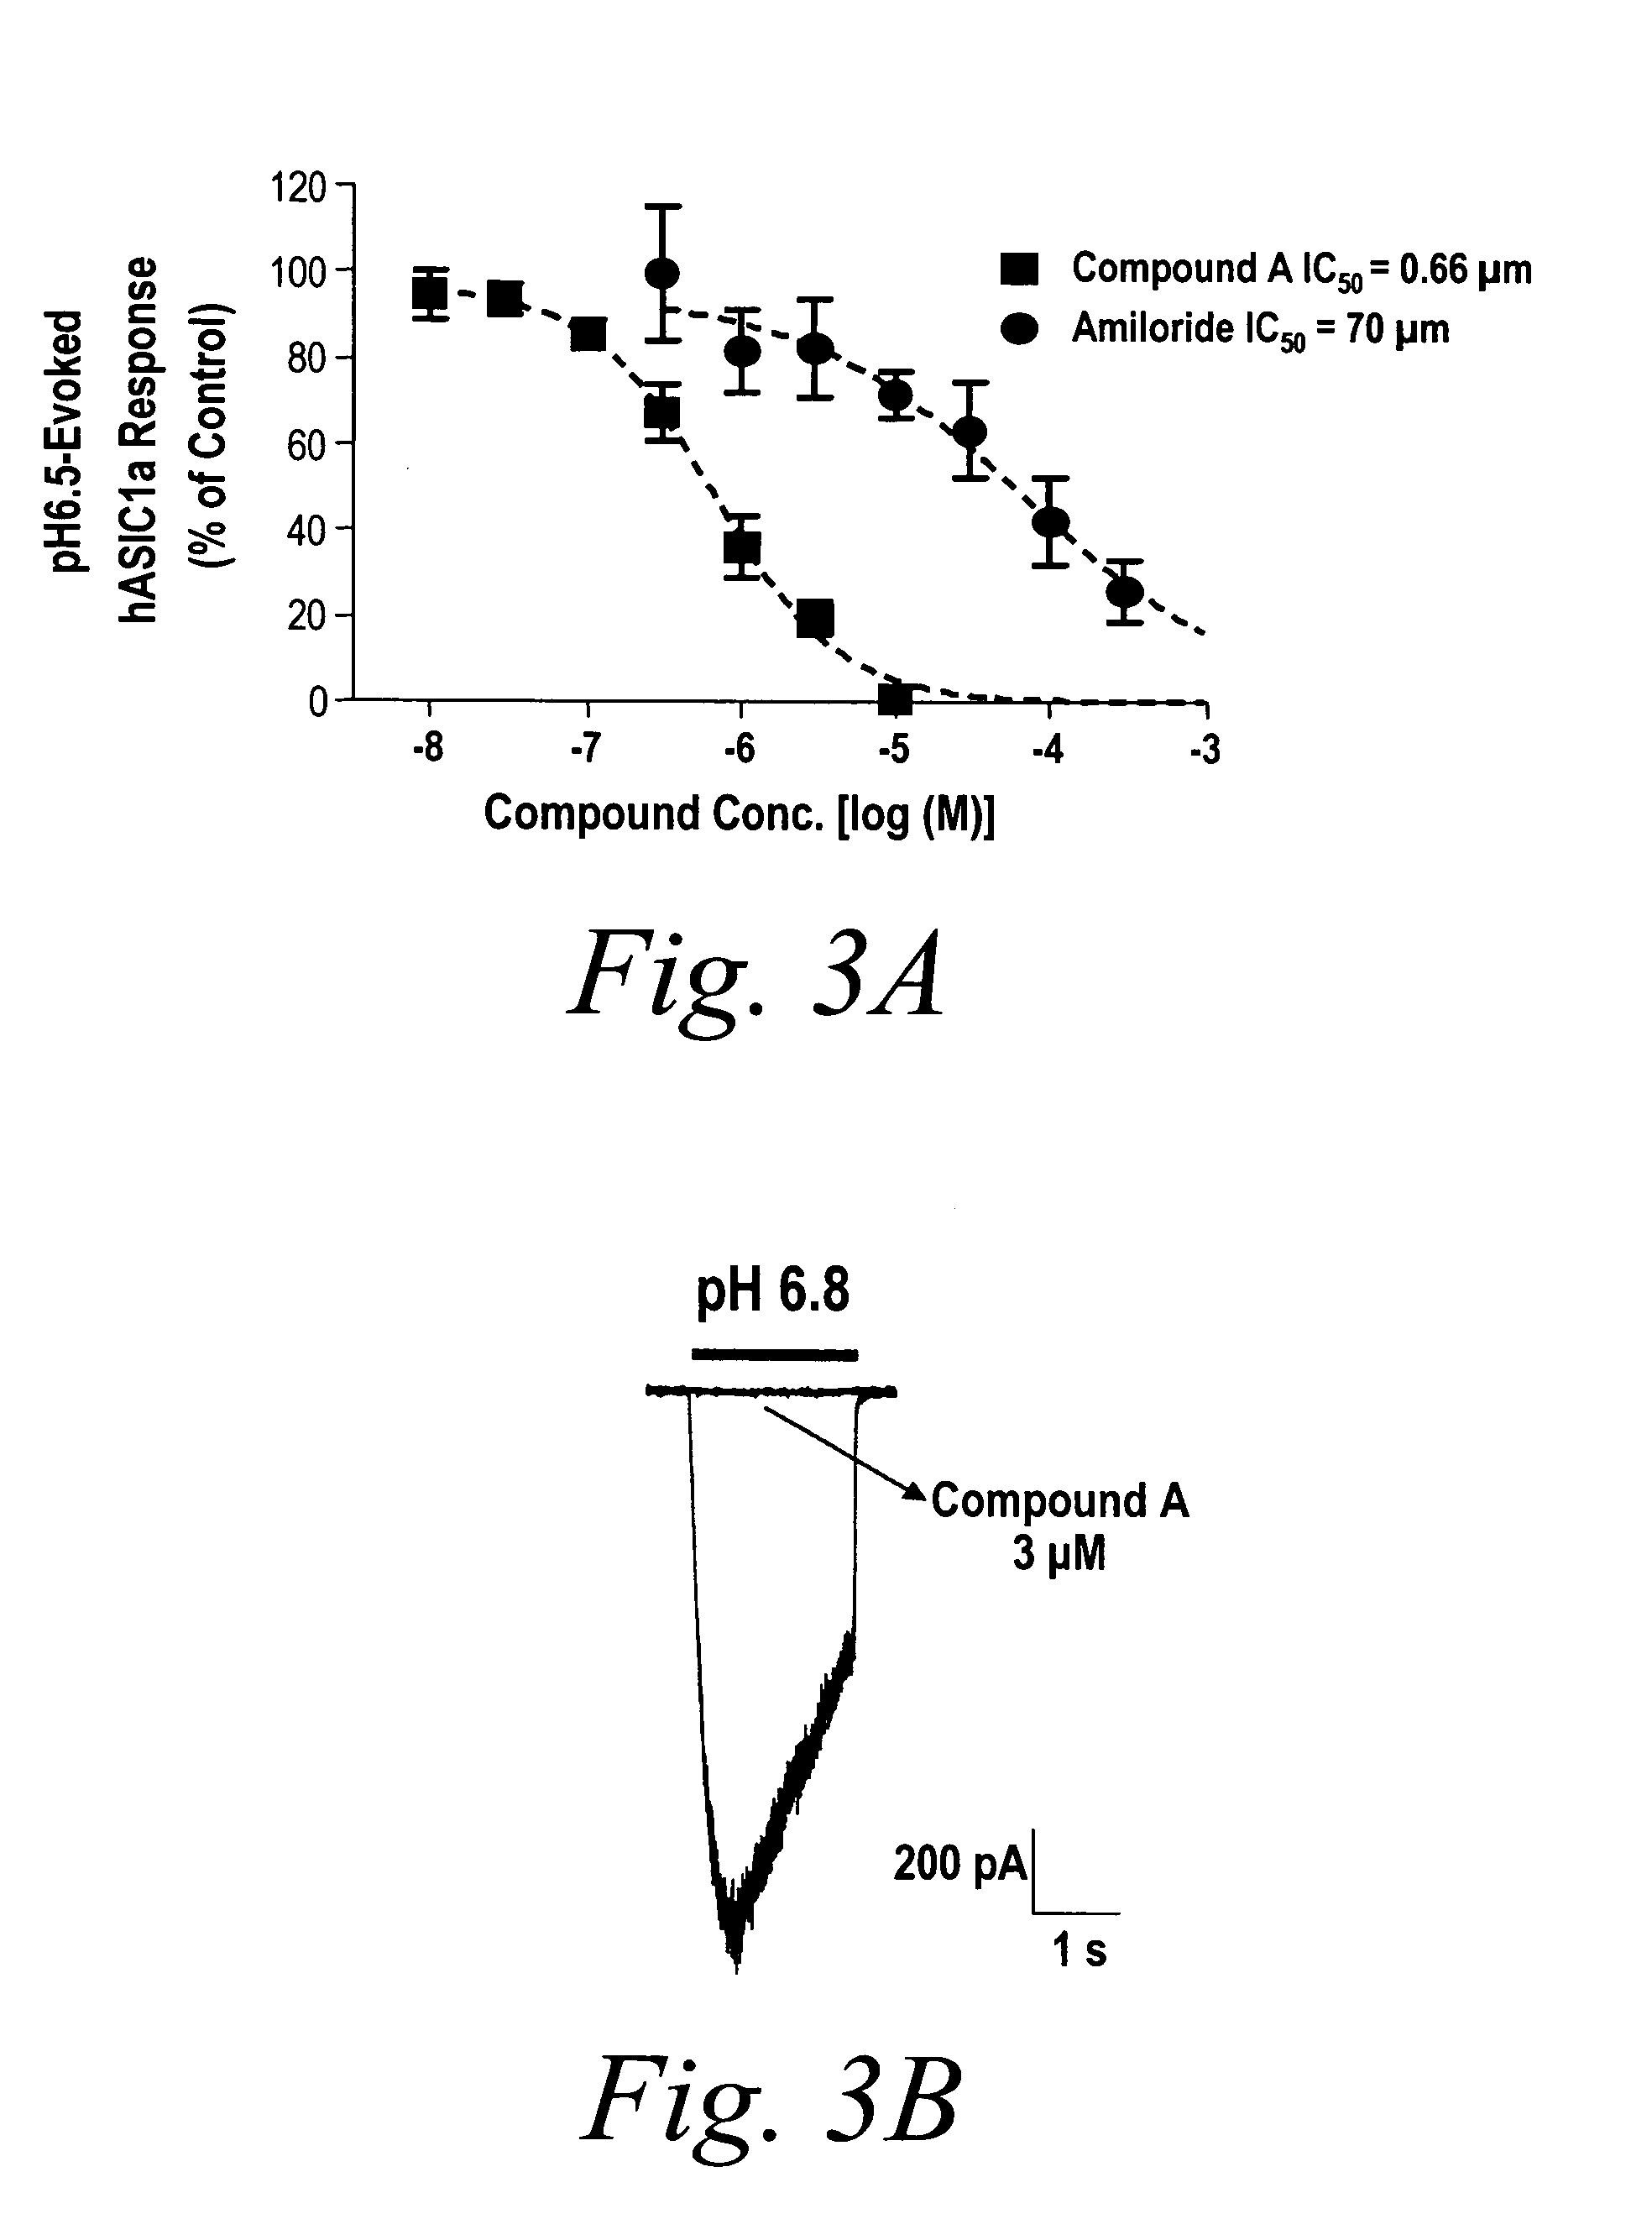 Pyrrolo [3,4-H] isoquinoline compounds and methods for modulating gated ion channels